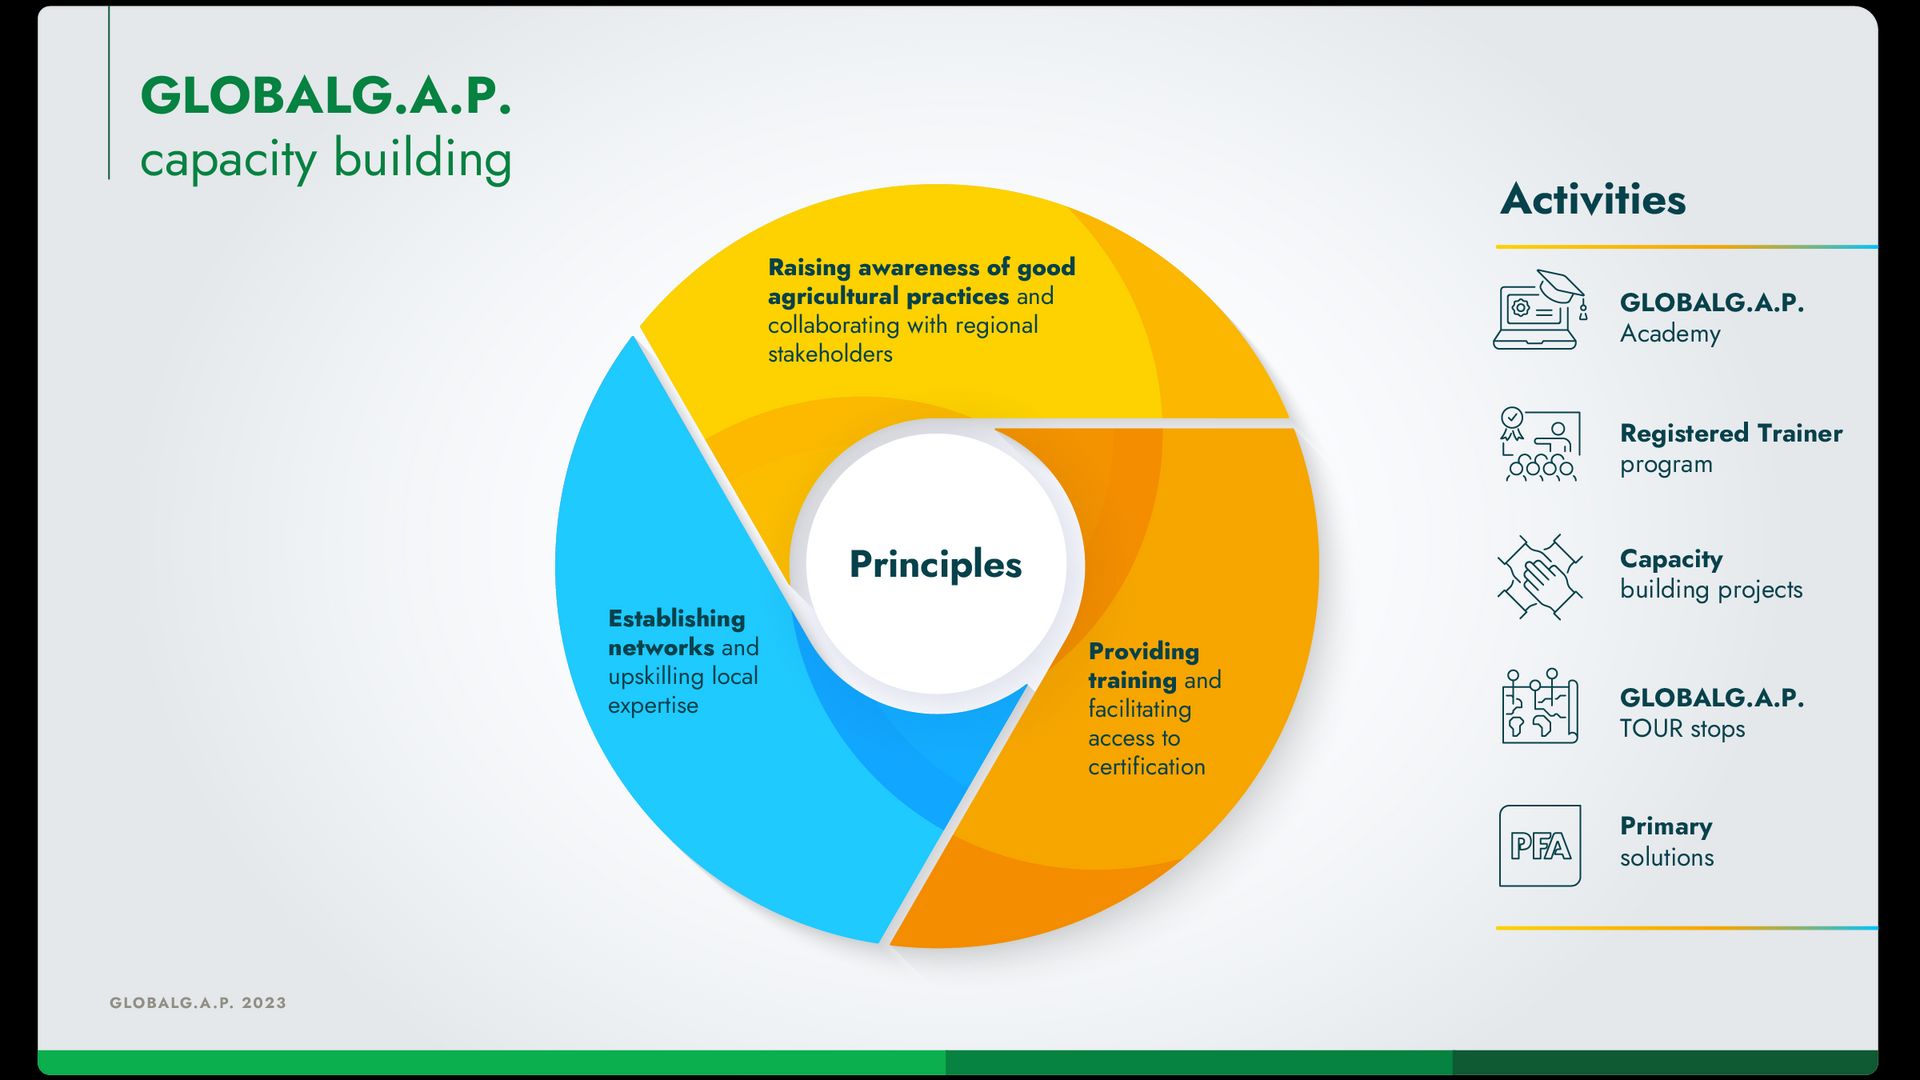 Infographic showing the principles and activities of GLOBALG.A.P. capacity building